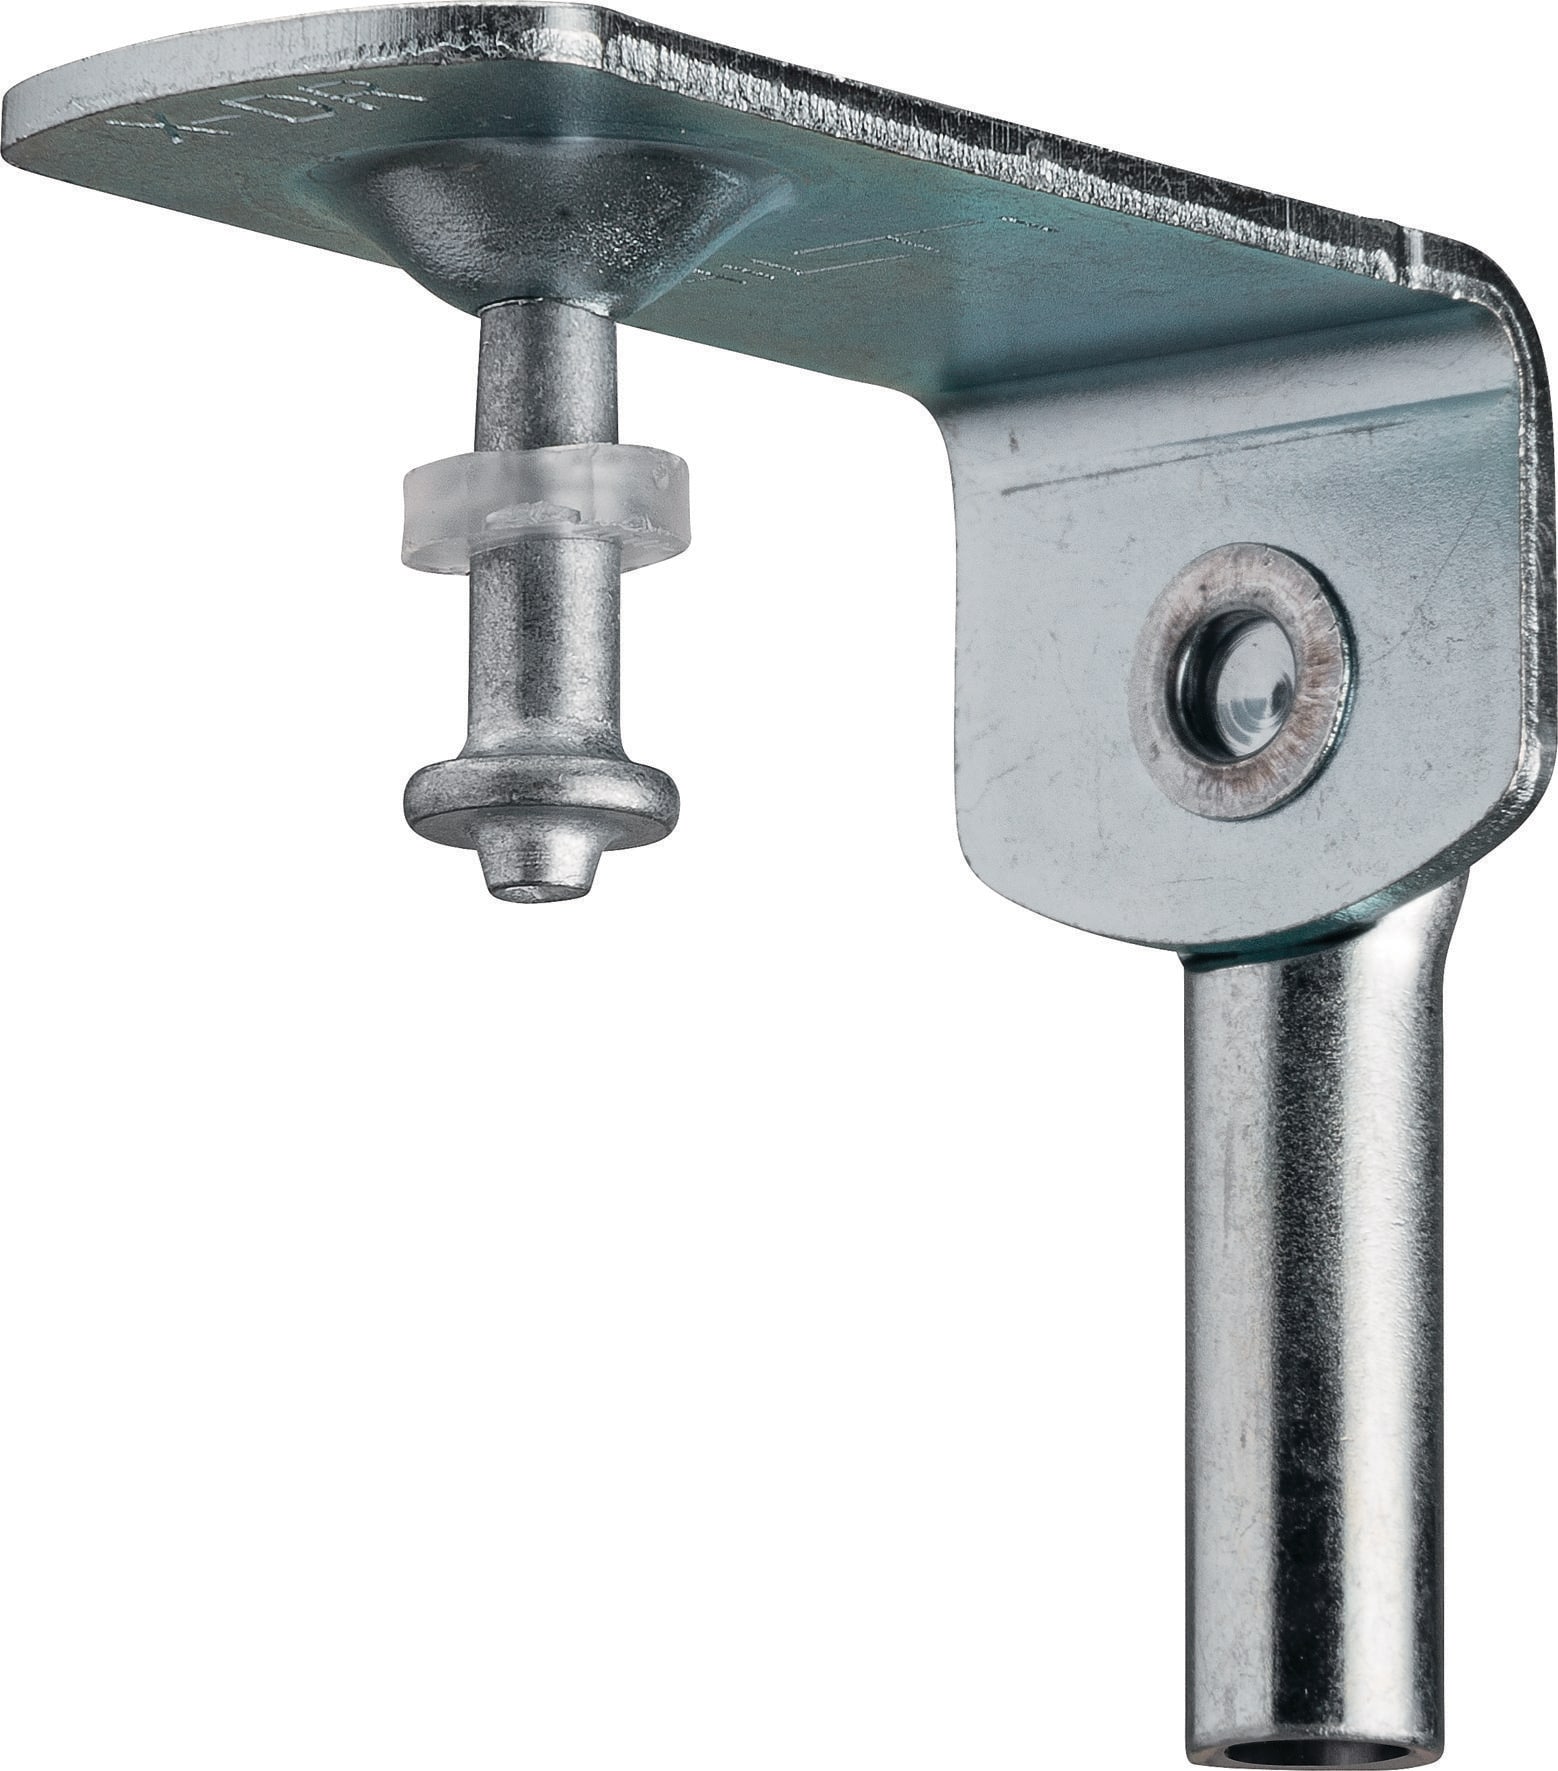 X-DR ALH Rod hanger with nail - Fastening elements - Hilti Canada